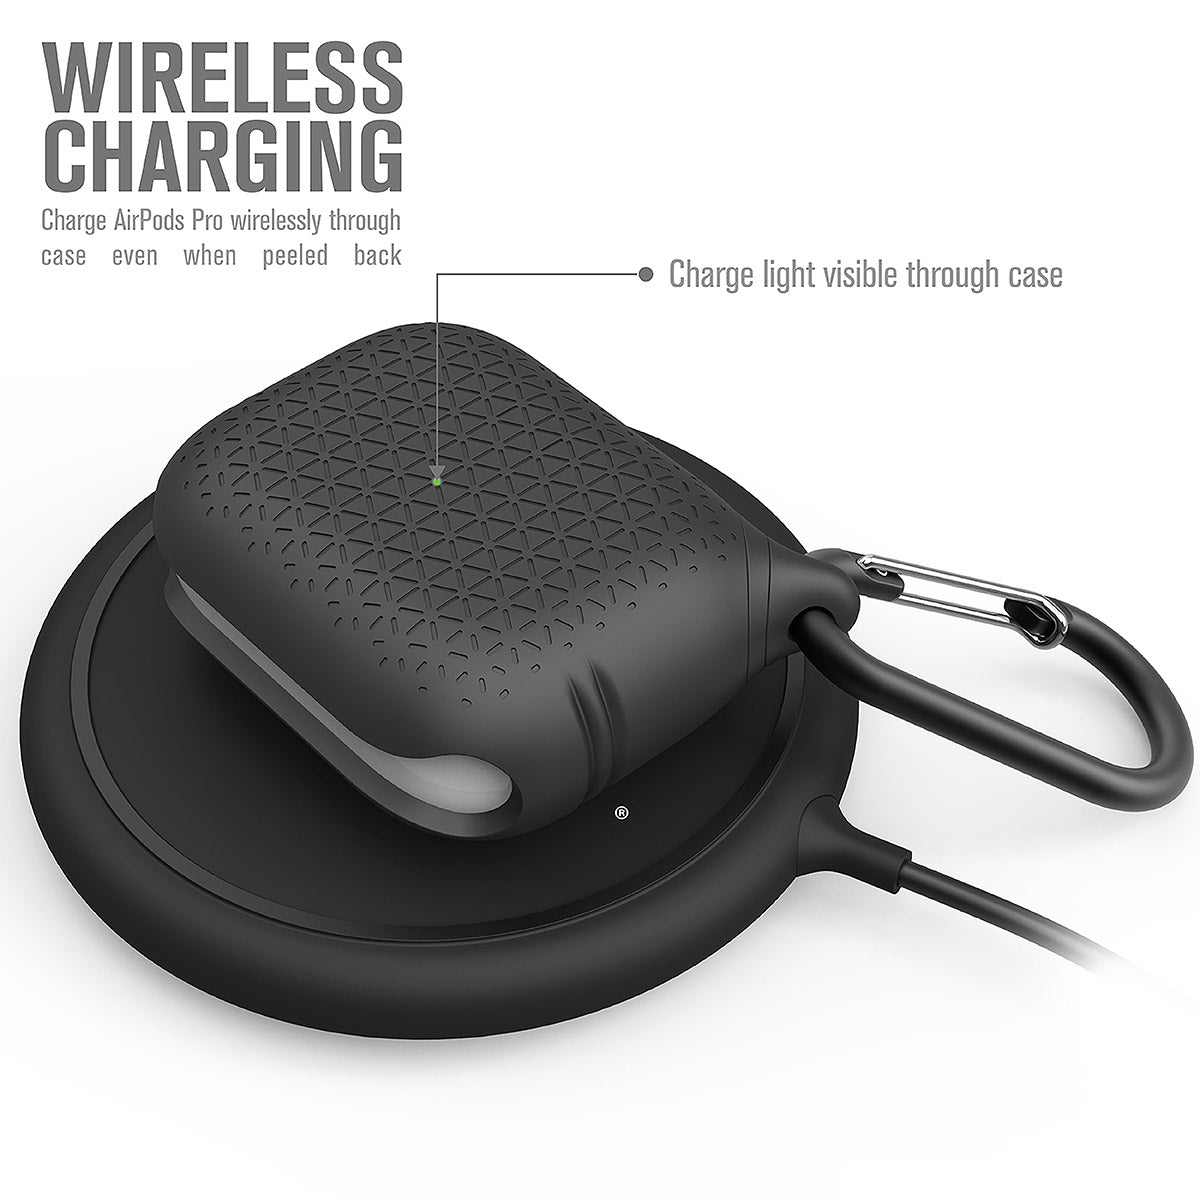 catalyst airpods pro gen 2 1 waterproof case carabiner premium edition stealth black on top of a wireless charger text reads wireless charging charge airpods pro wirelessly through case even when peeled back charge light visible through case